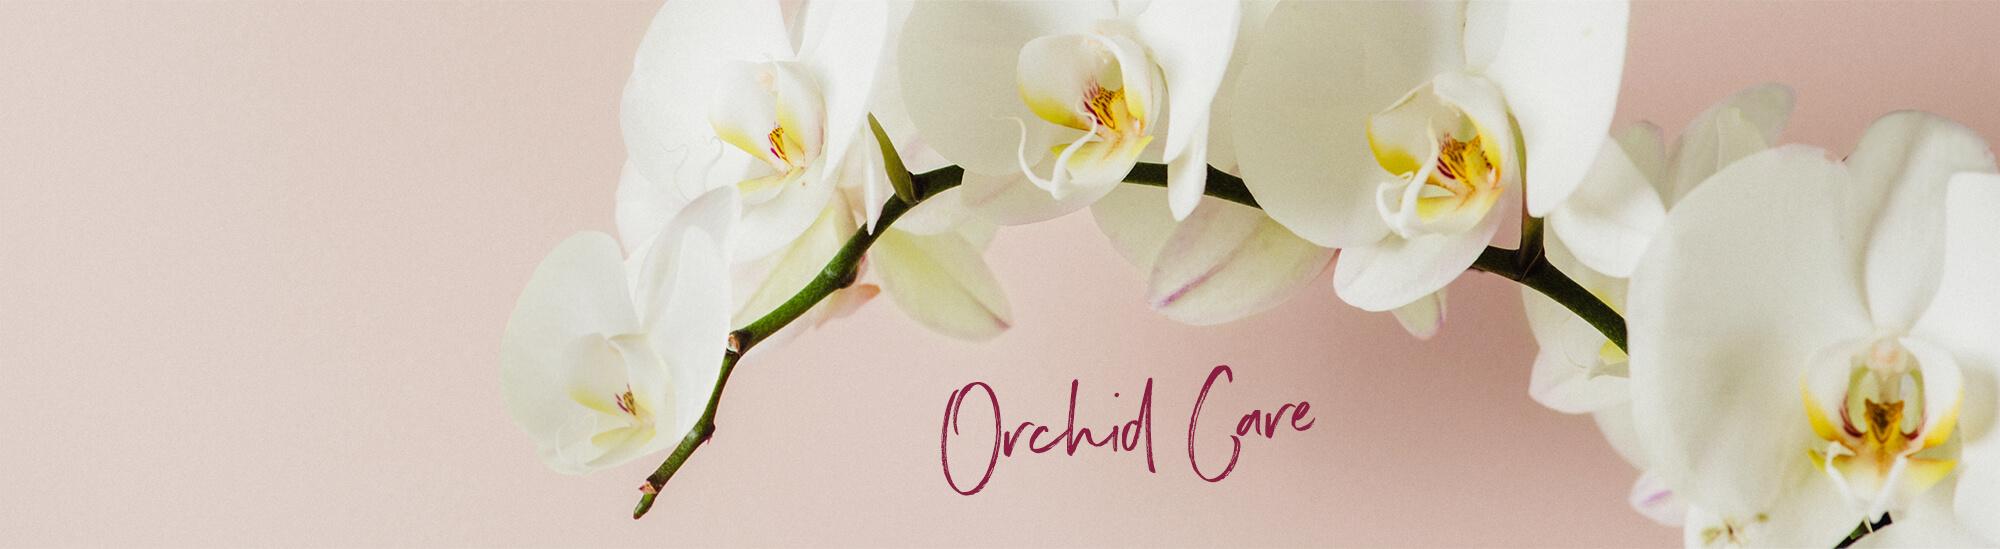 Tips and Tricks for Orchid Care